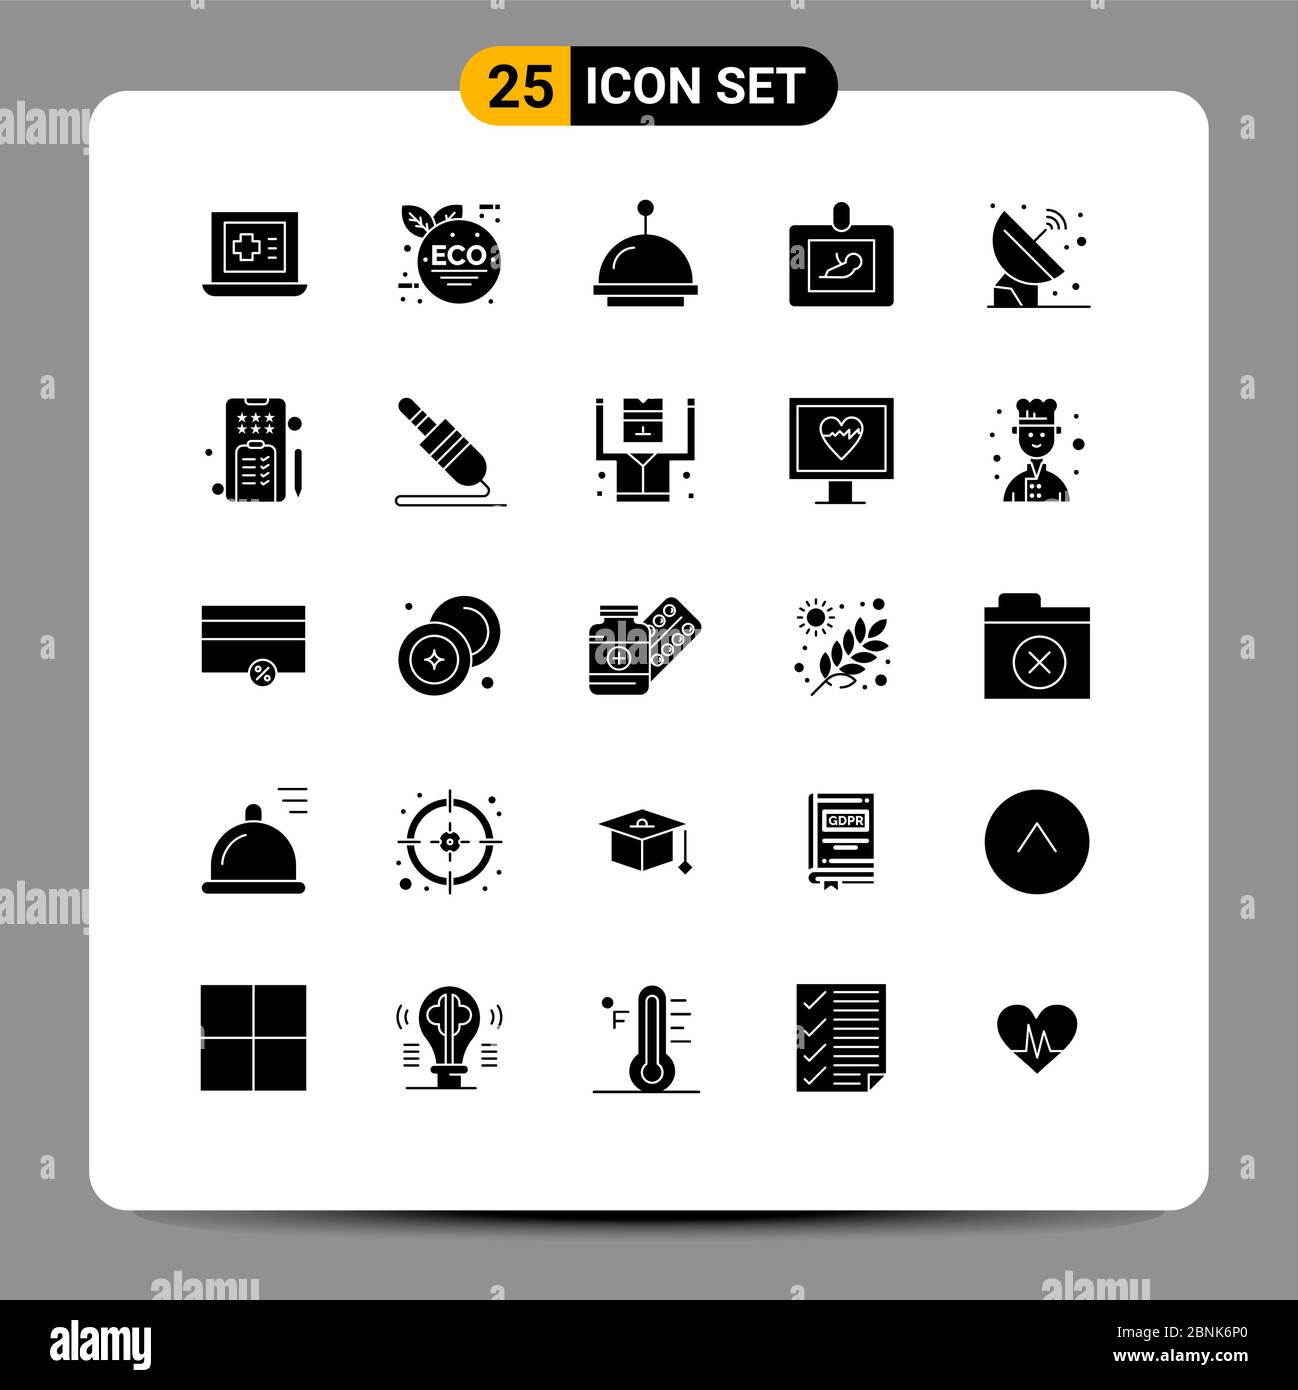 Set of 25 Modern UI Icons Symbols Signs for space, orbit, hotel, astronomy, ultrasound Editable Vector Design Elements Stock Vector